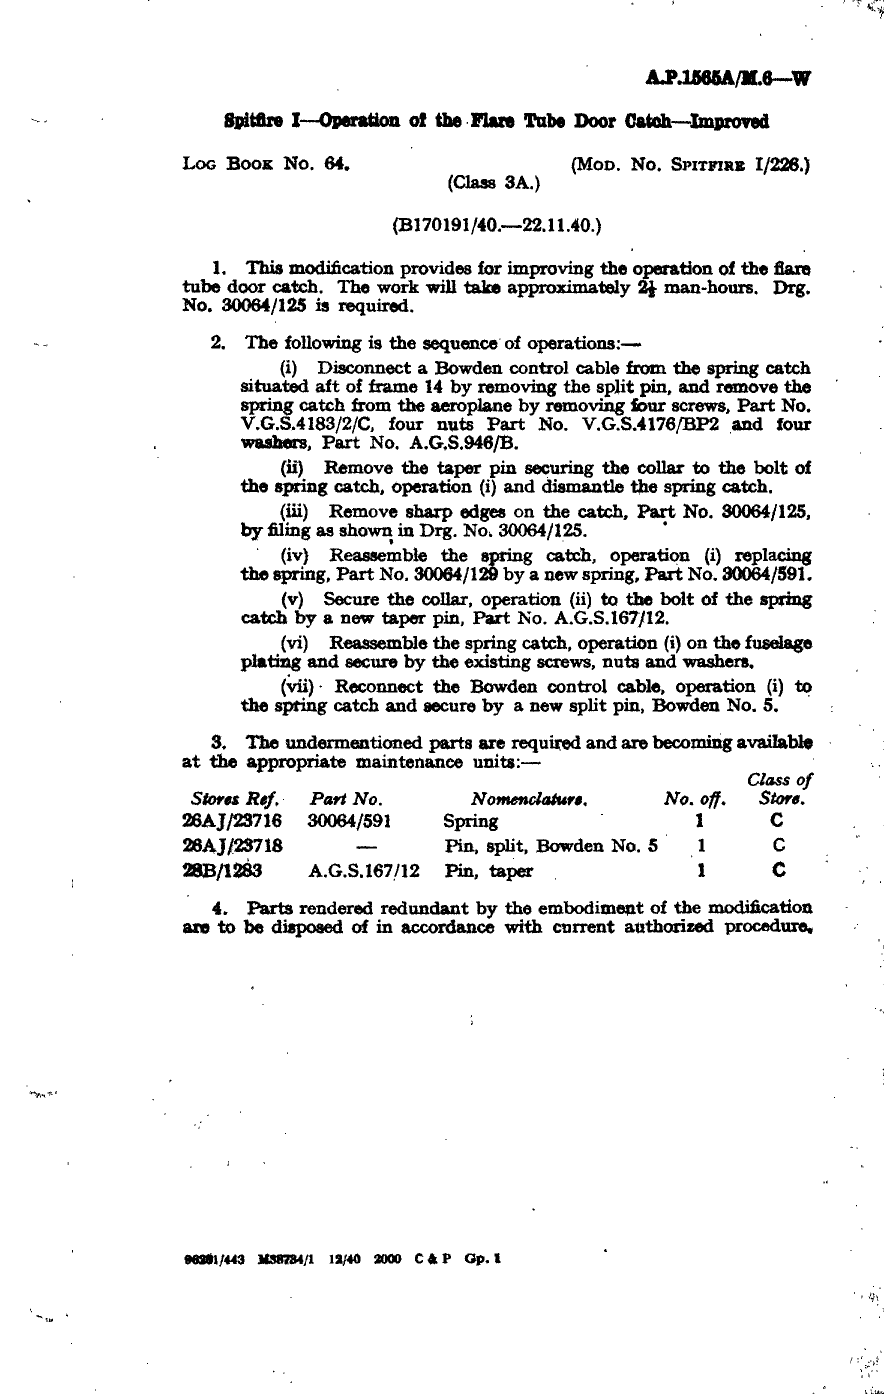 Sample page 1 from AirCorps Library document: Spitfire I Operation of the Flare Tube Door Catch Improved